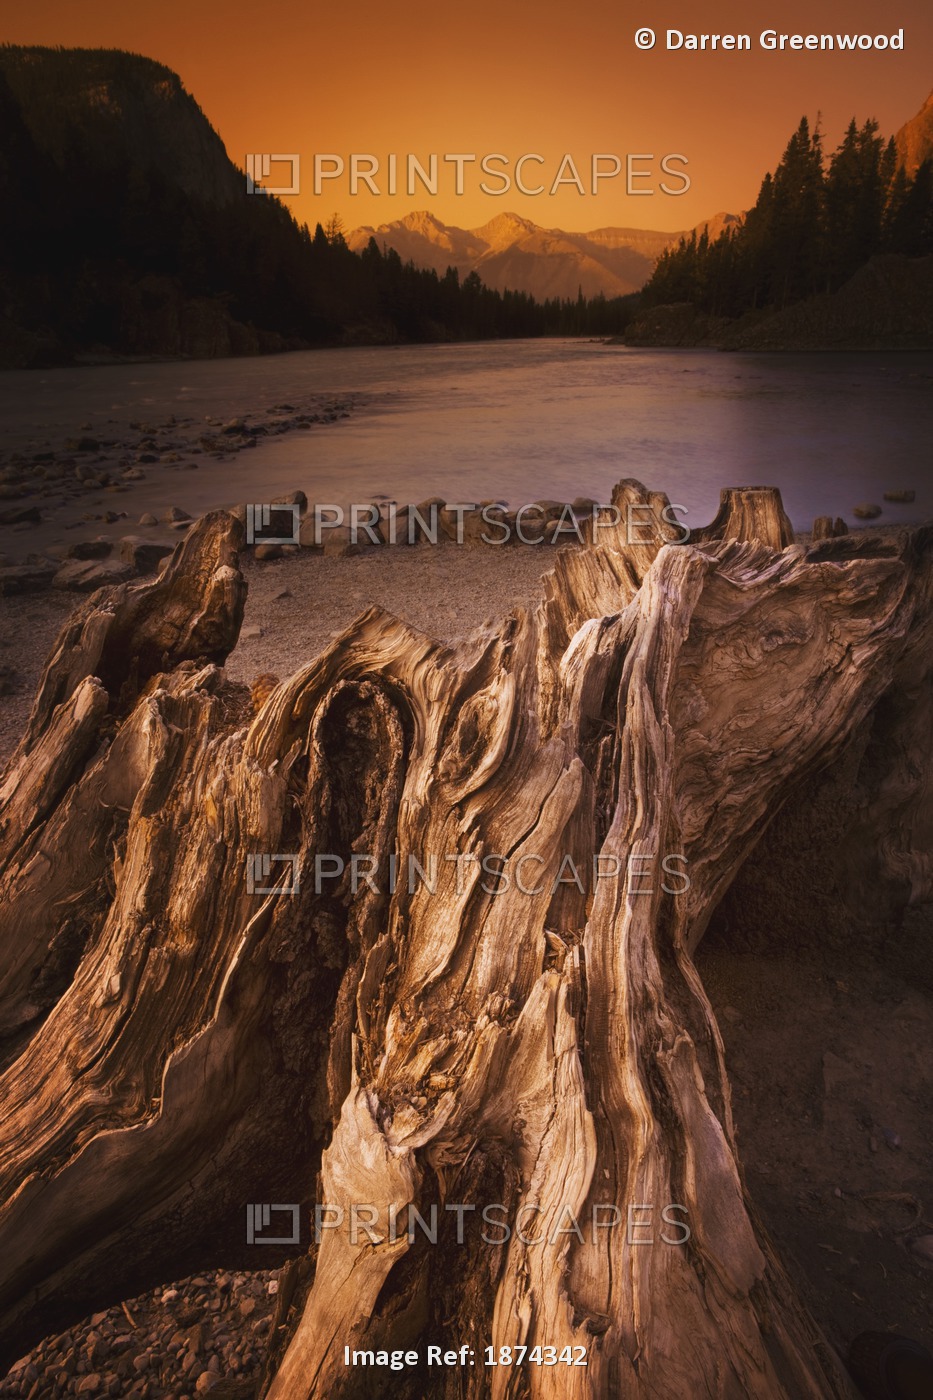 Banff, Alberta, Canada; Driftwood And A Mountain River At Sunset